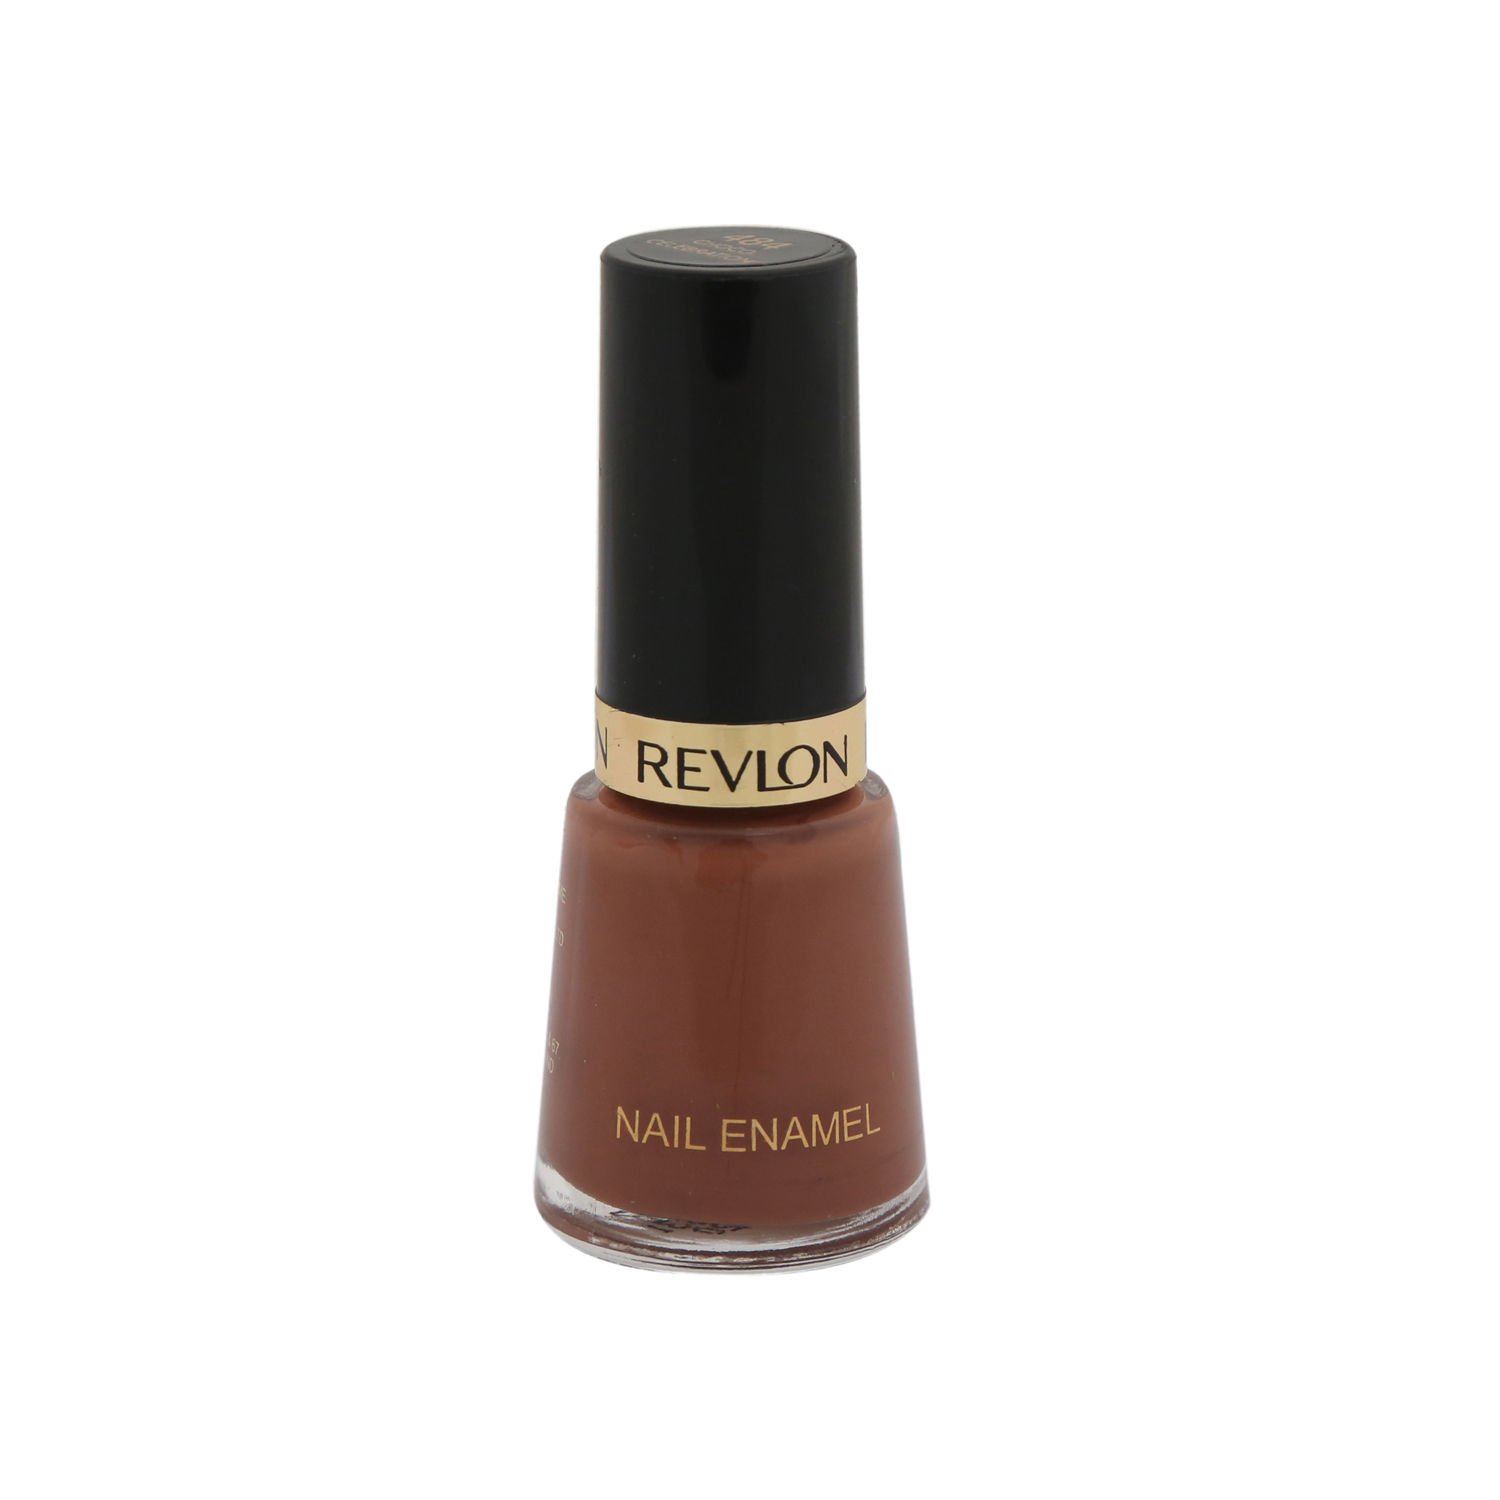 Buy Revlon Nail Enamel, Fire Fox, 0.5-Ounce Online at Lowest Price Ever in  India | Check Reviews & Ratings - Shop The World